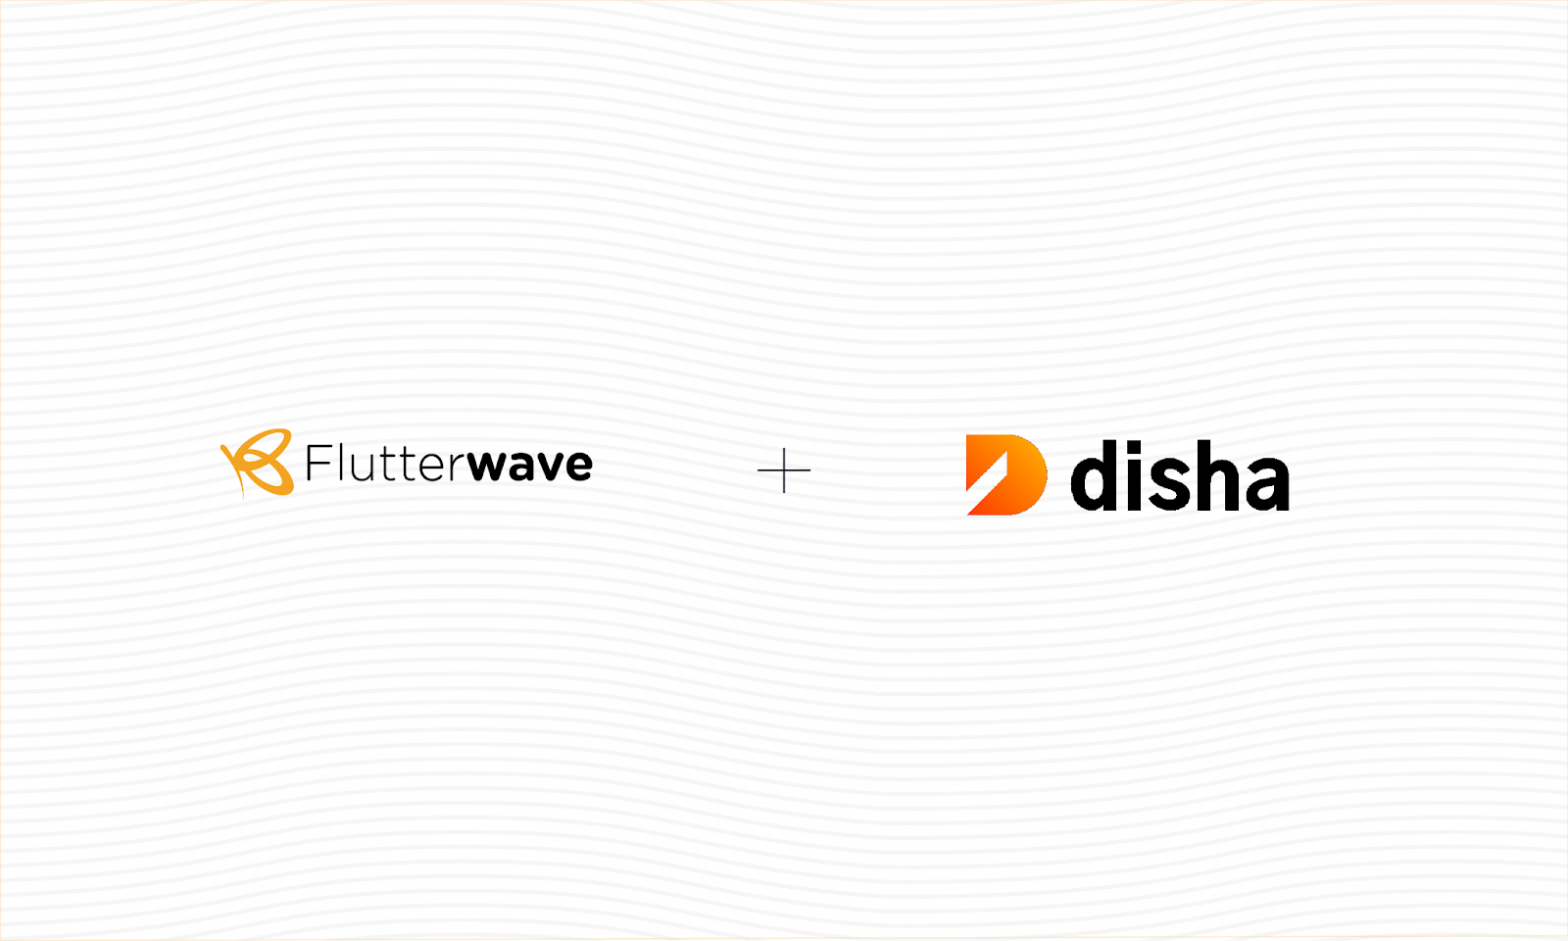 Disha acquired by Flutterwave